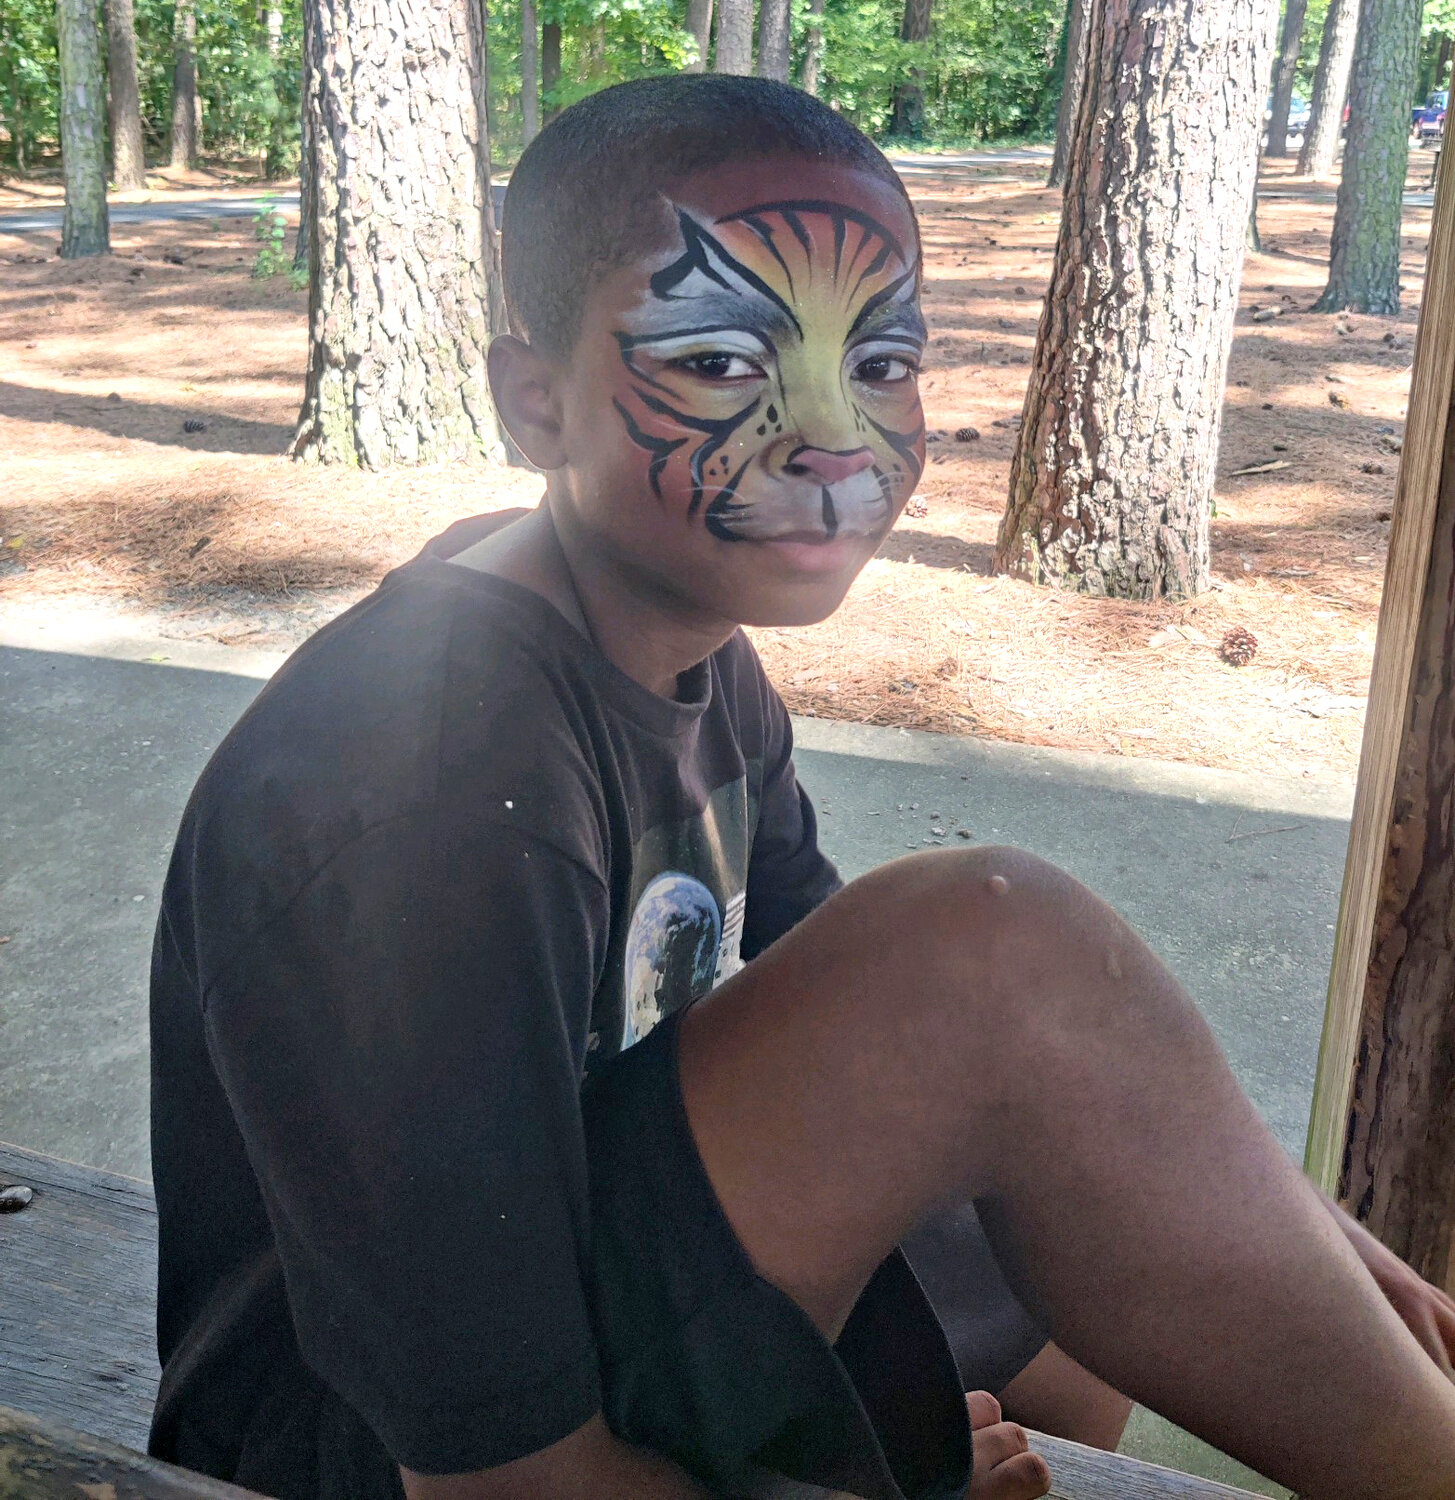 The Departments of Social Services in Caroline, Dorchester, Queen Anne’s, and Talbot counties recently hosted an appreciation event for area foster parents at the Tuckahoe State Park Lake Pavilion in Ridgely. In addition to providing steamed crabs, the event included lunch, a DJ, face painting, and access to the park’s playground and trails. For information on becoming a foster or adoptive parent in Talbot County, call the Talbot County Department of Social Services at 410-820-7371 or visit midshoreresourceparents.com. Pictured is family participant Tavion Wilson.